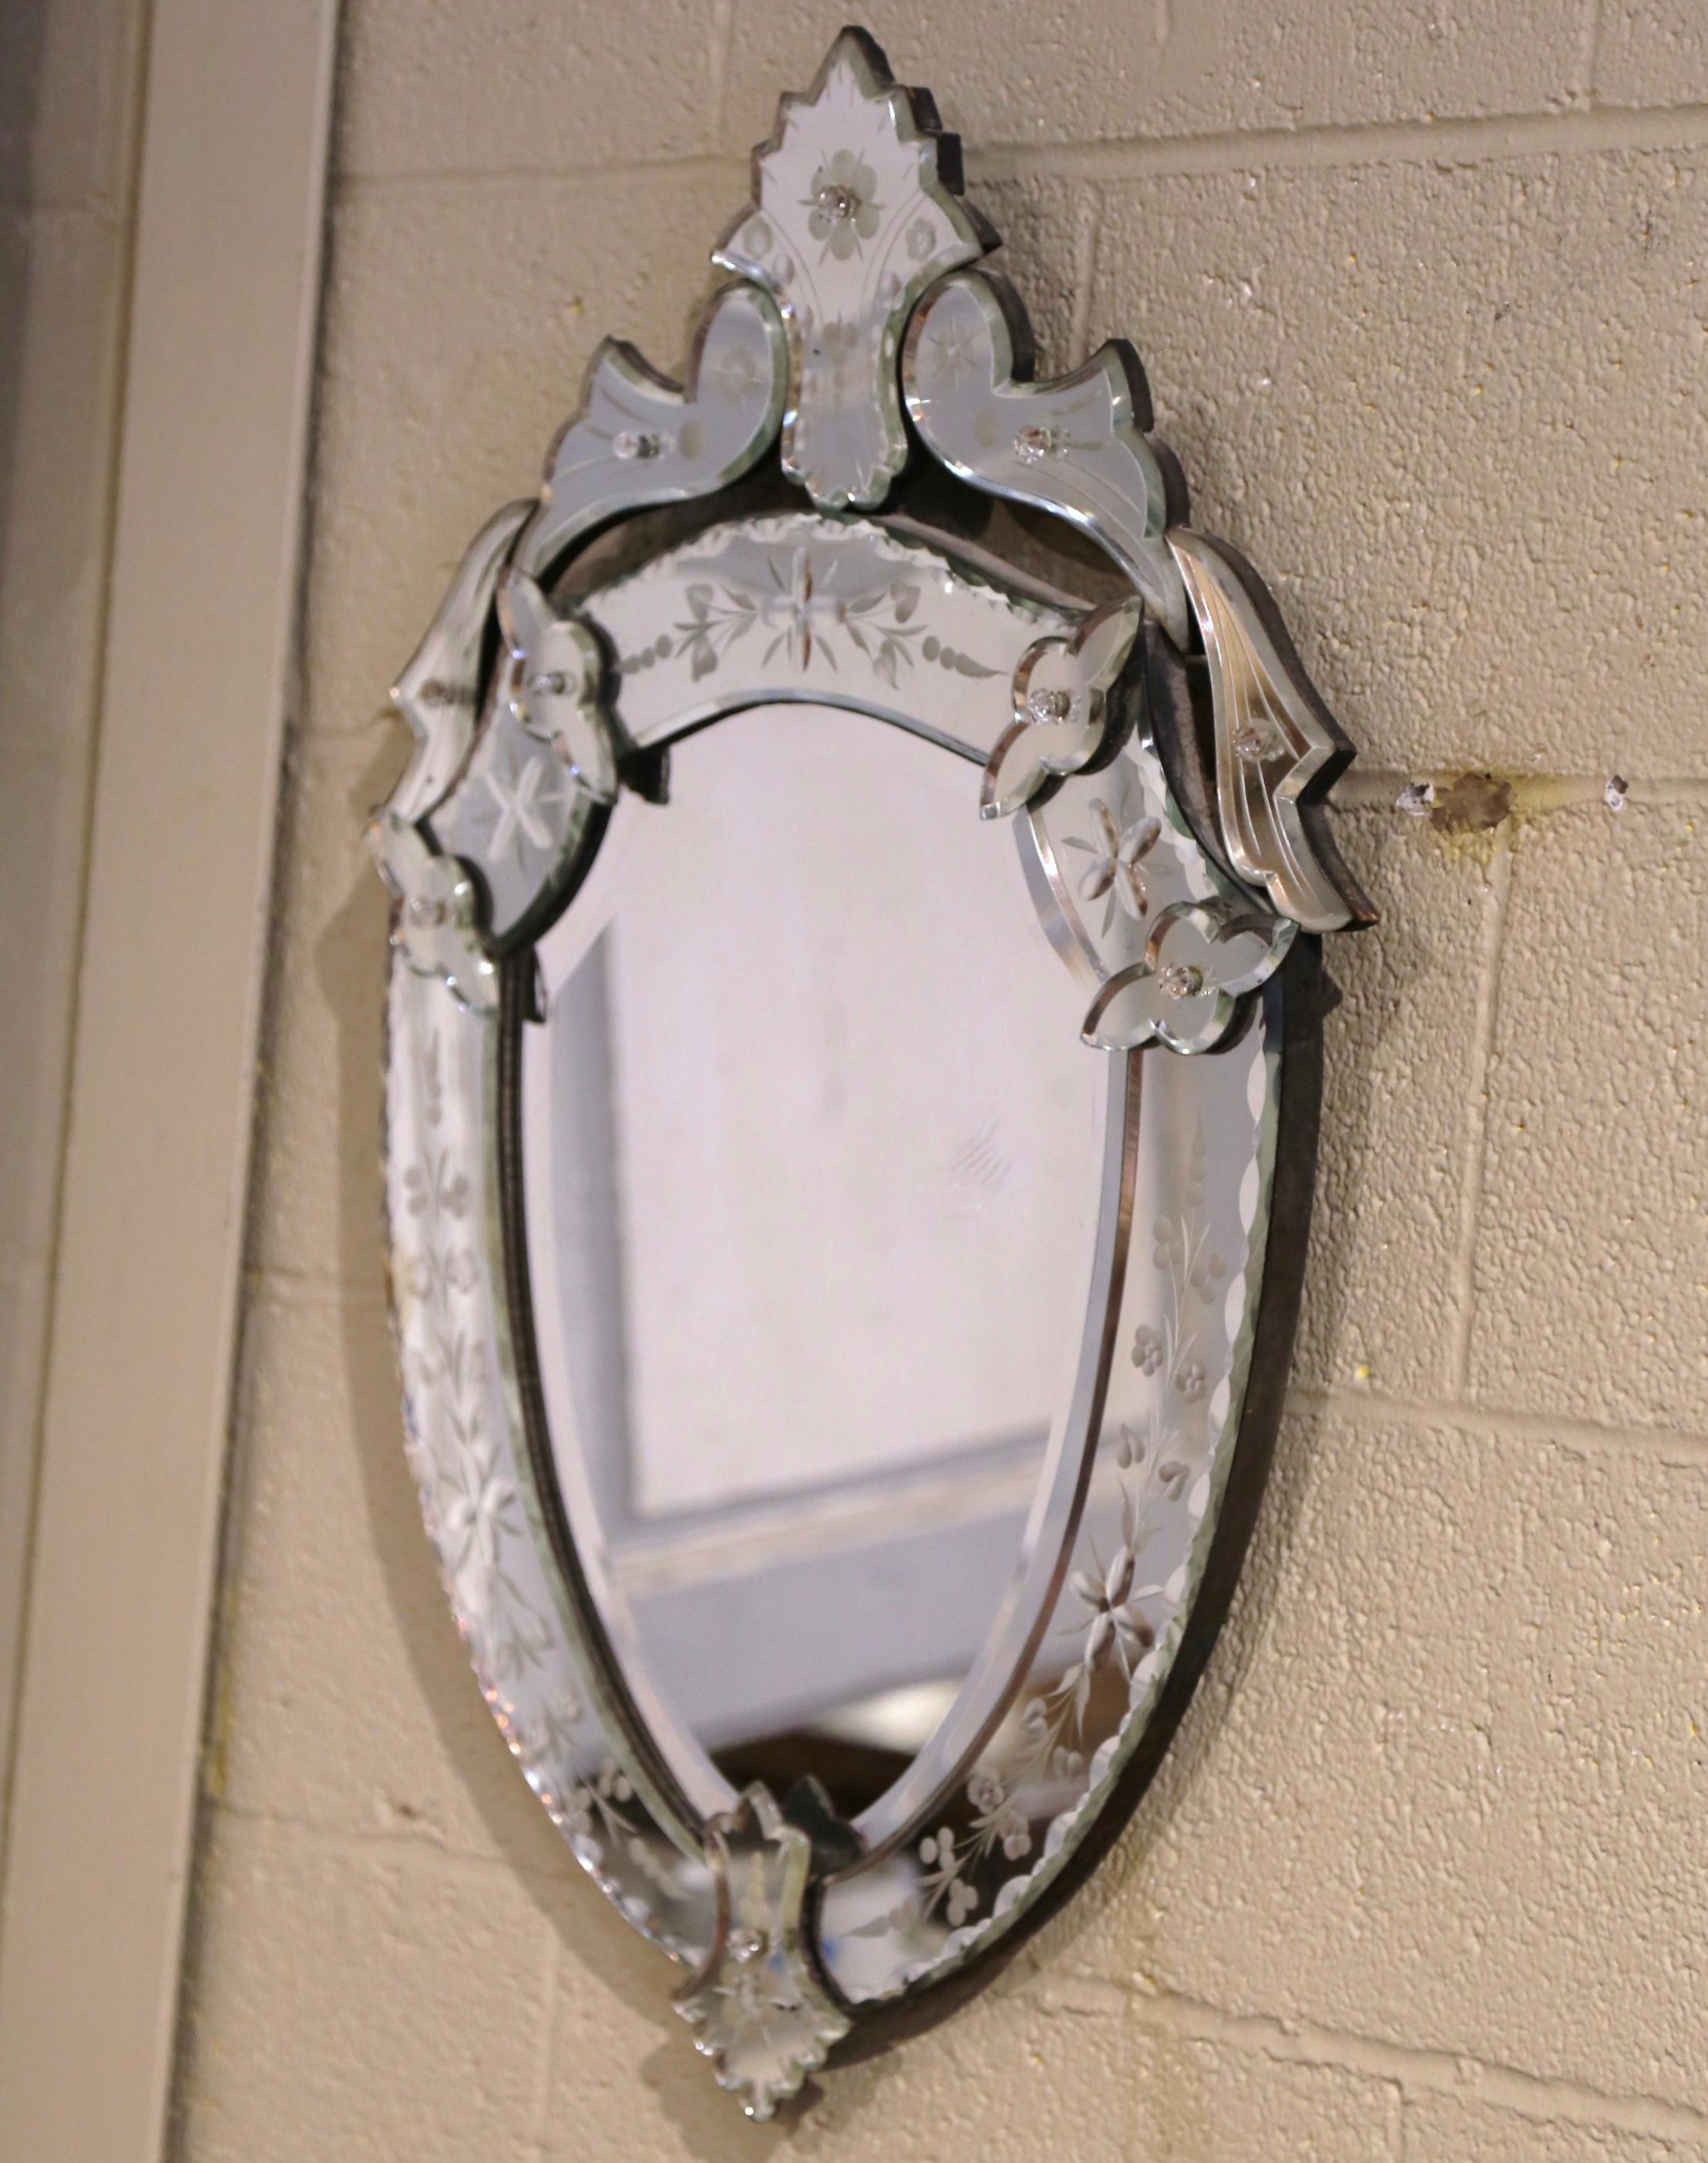 Midcentury Italian Venetian Beveled Shield Mirror with Painted Floral Etching For Sale 1